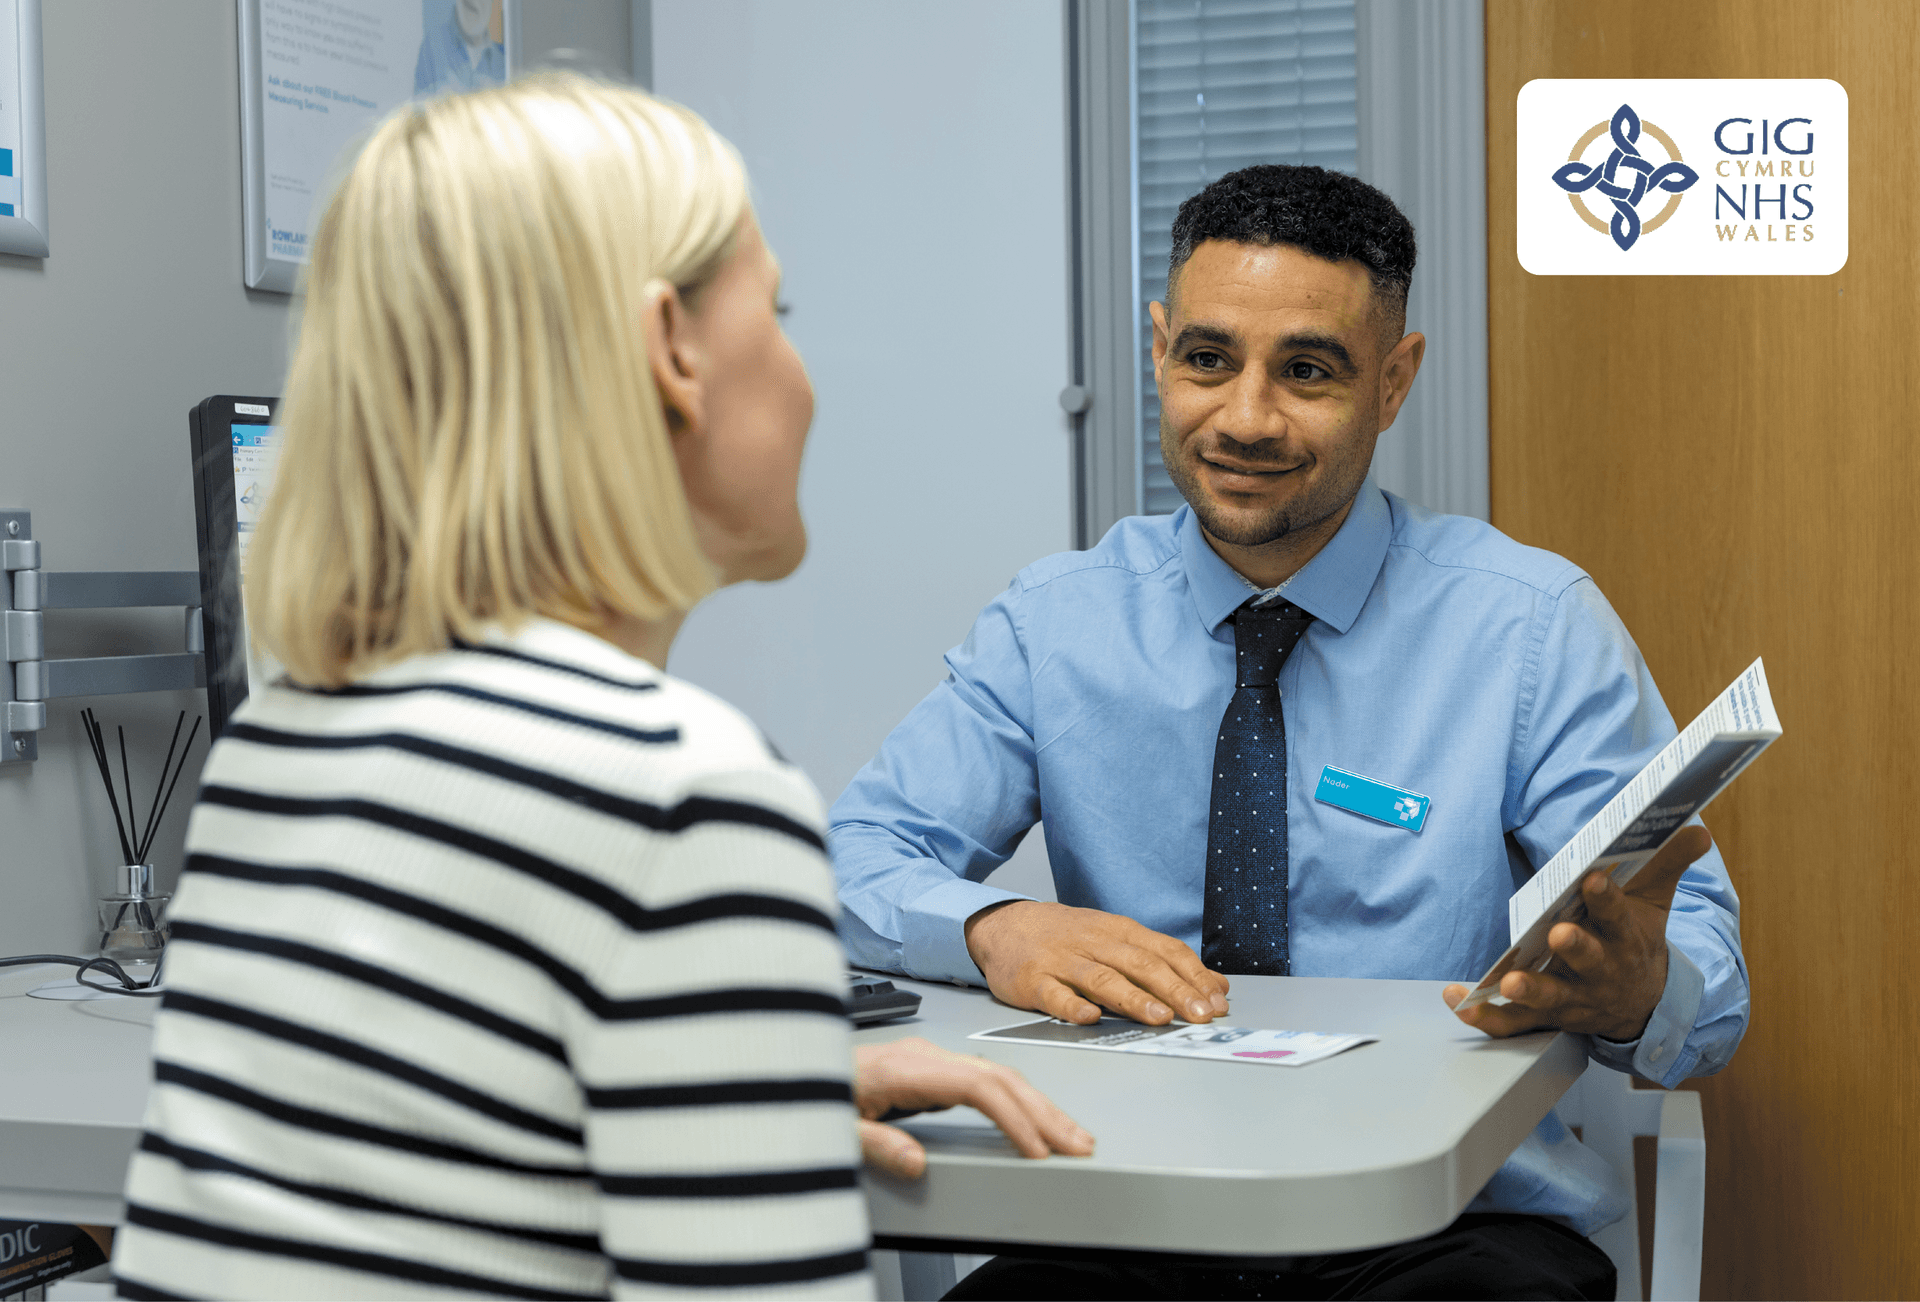 pharmacist giving advice to customer with NHS Wales logo